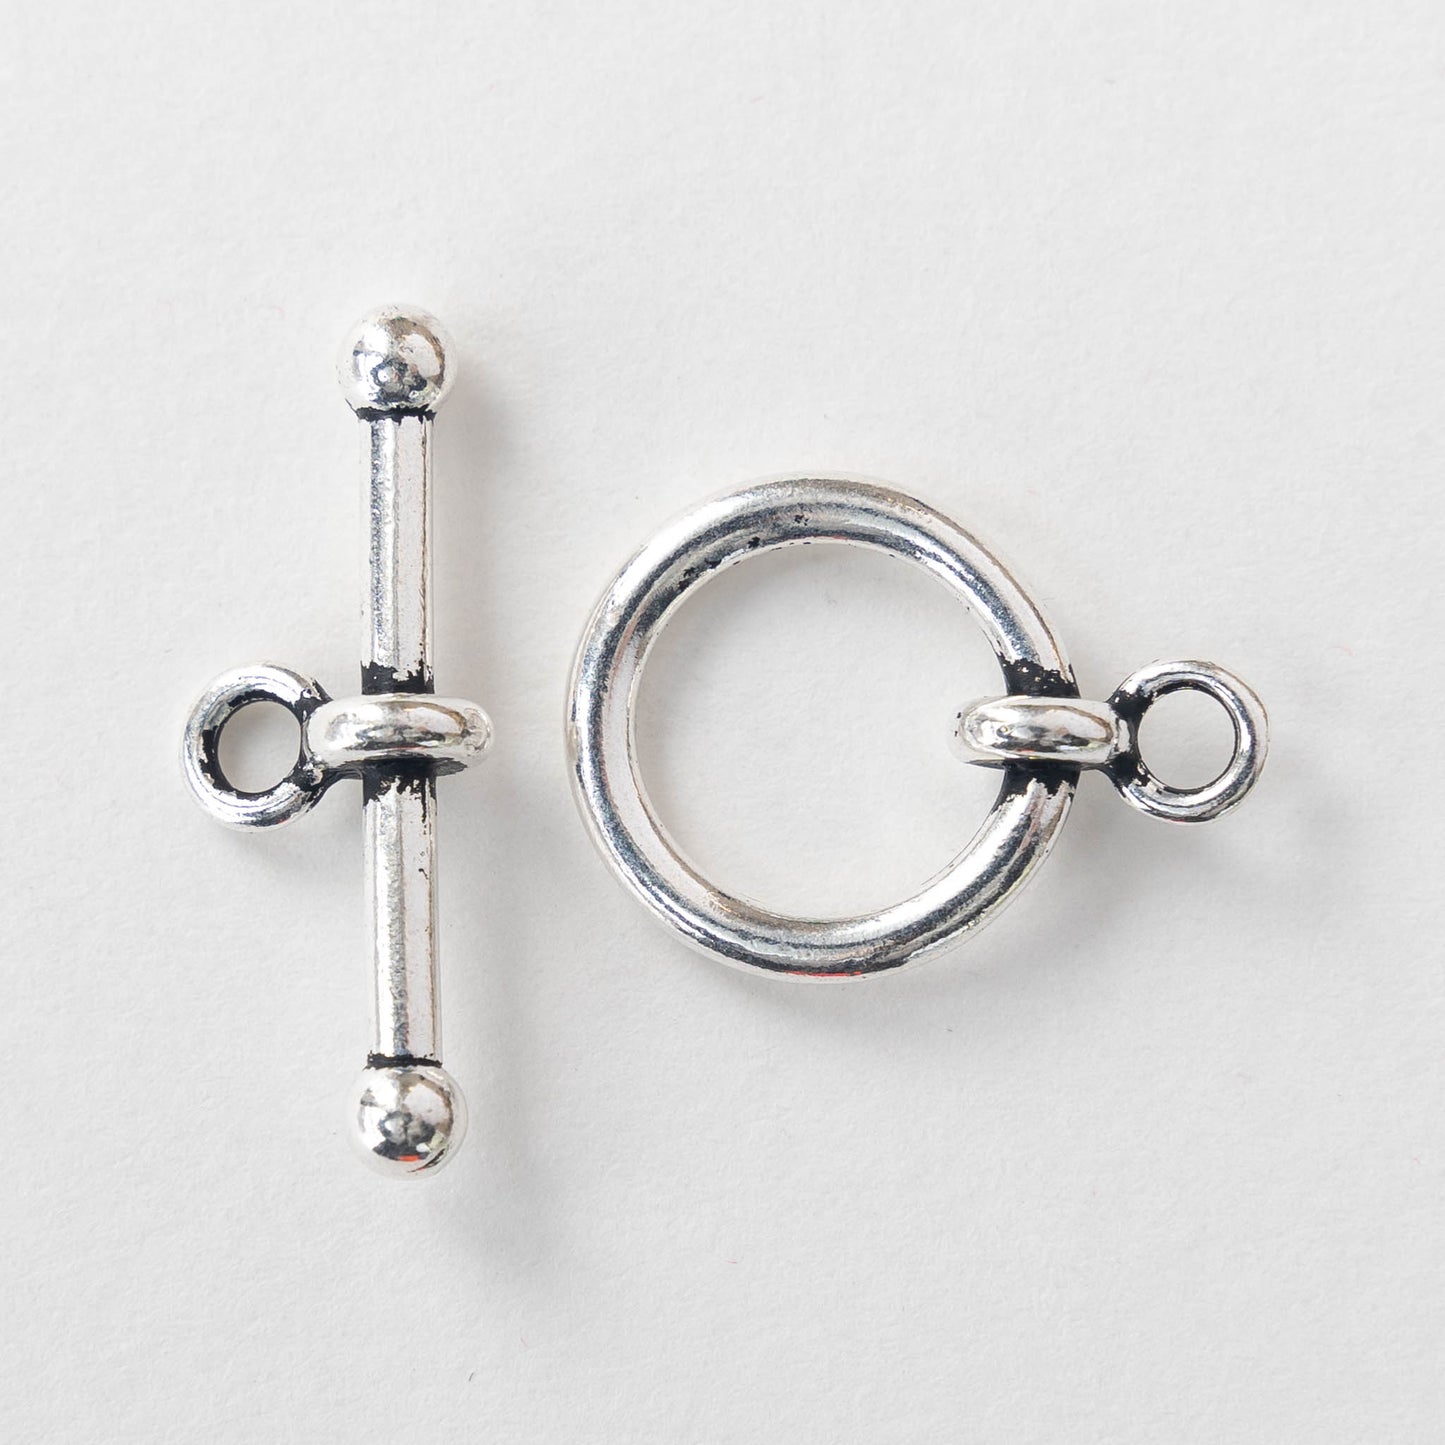 Large 18.5mm Toggle Clasp - Antiqued Silver Finish - 1 Clasp